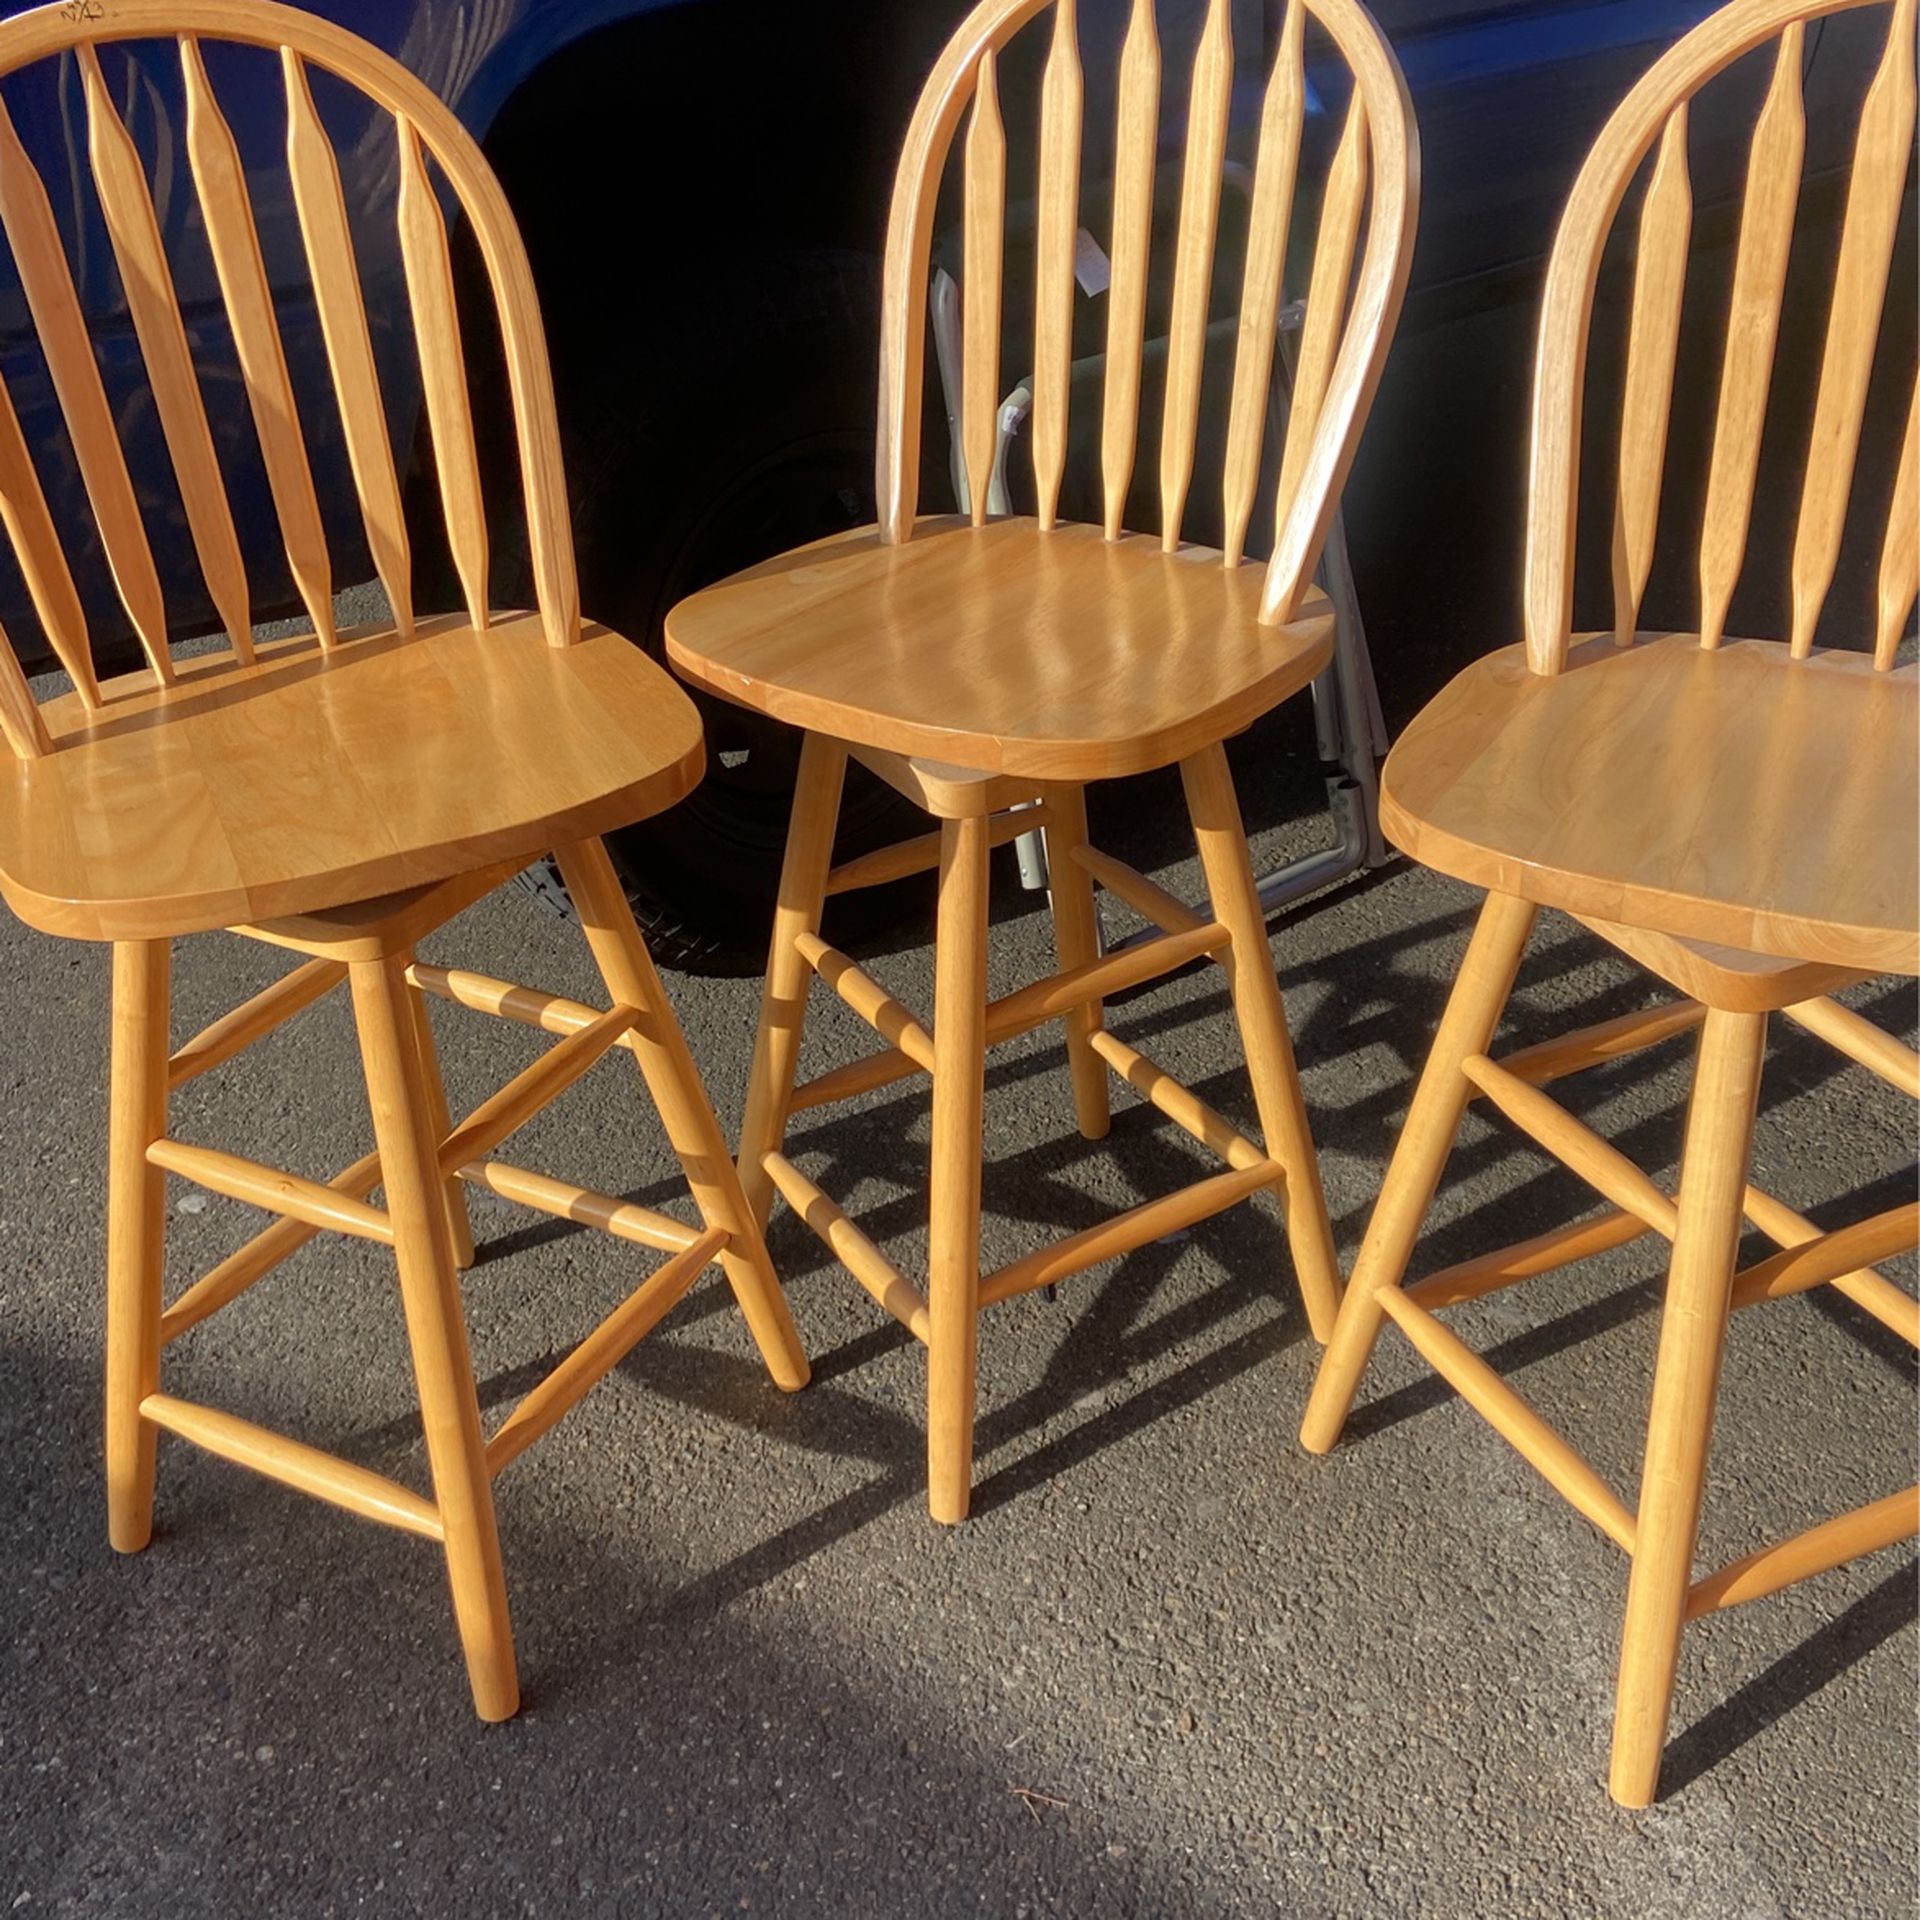 3 Bar Stools Price 50$   Condition Like New,Pick Up. E.   Side Tacoma  